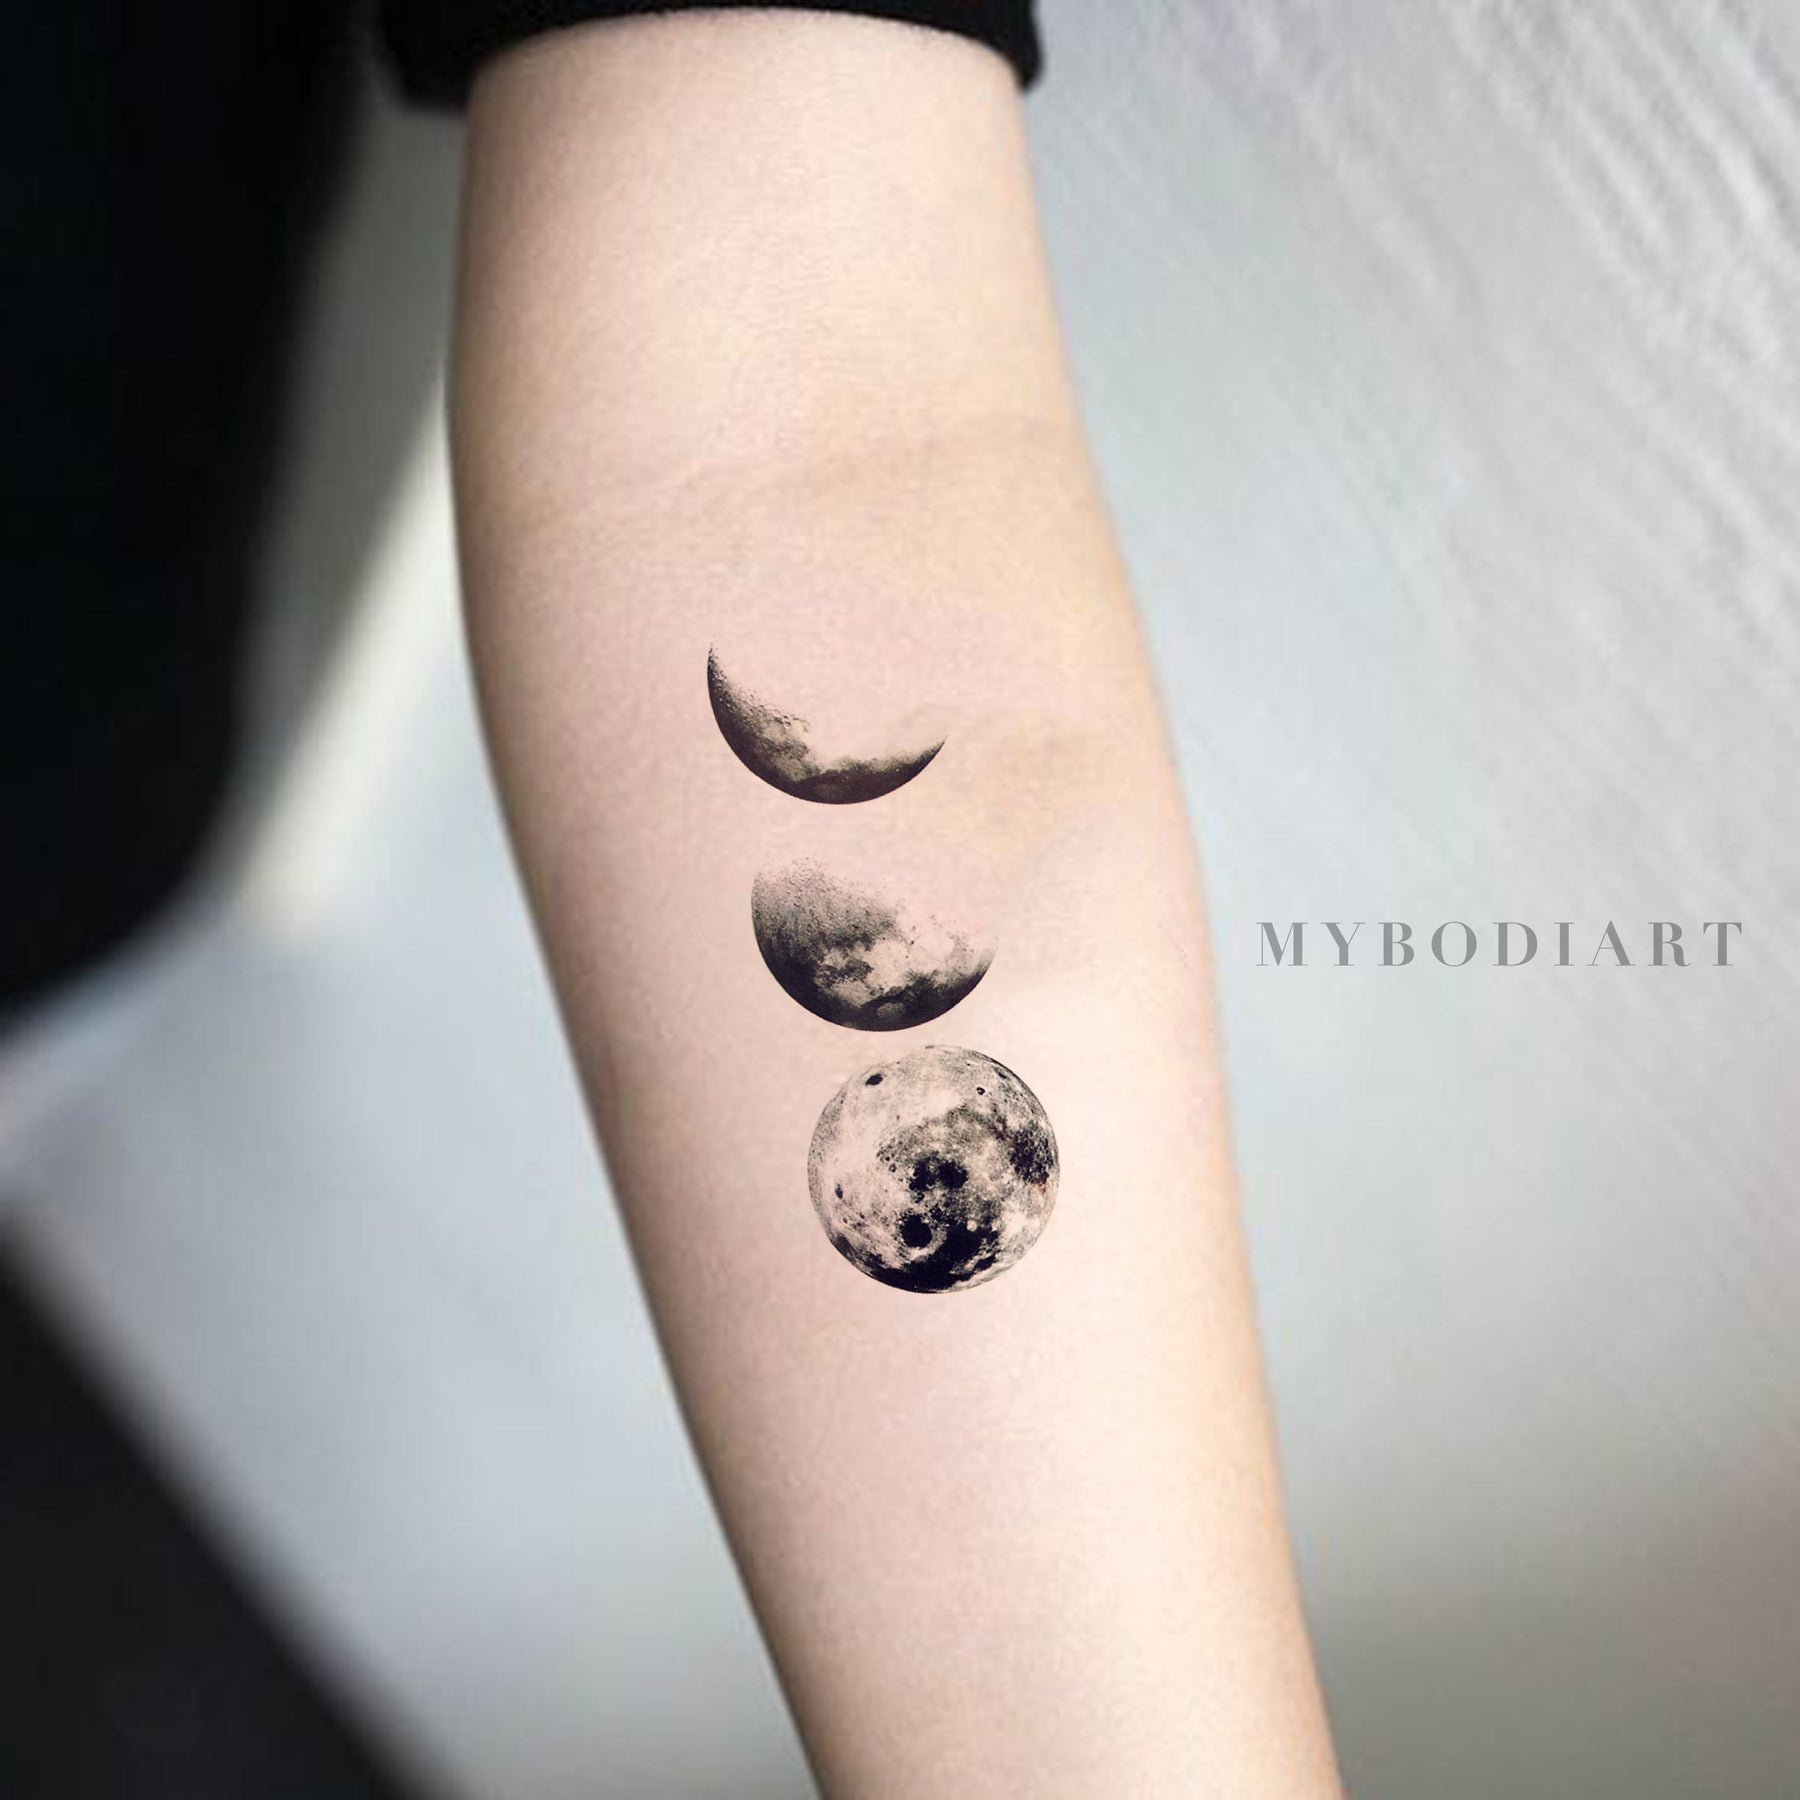 My moon phases tattoo Done by the fabulous Ian Reynold at Castro Tattoo in  San Francisco CA  rtattoos